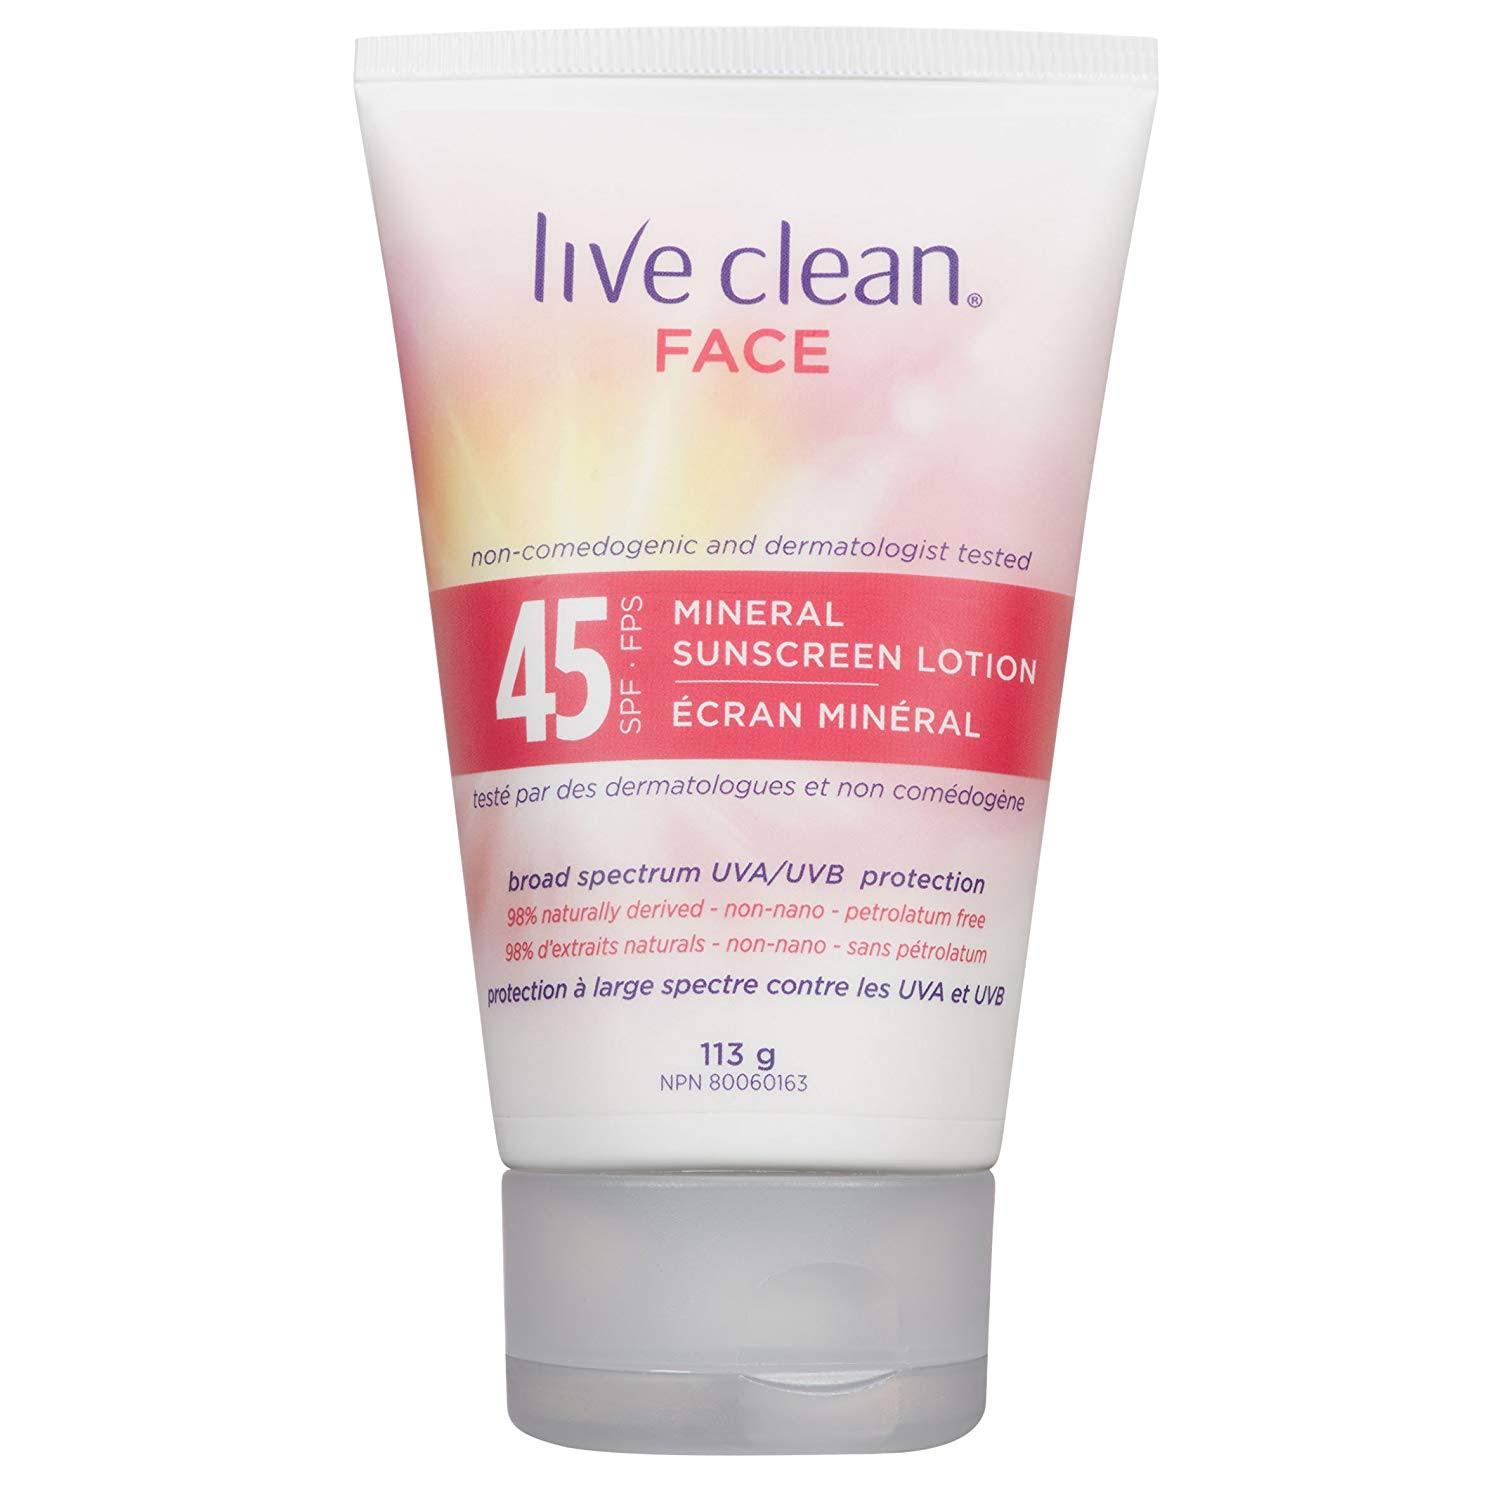 Live Clean Face Mineral Sunscreen Lotion, SPF 45 - 113 g